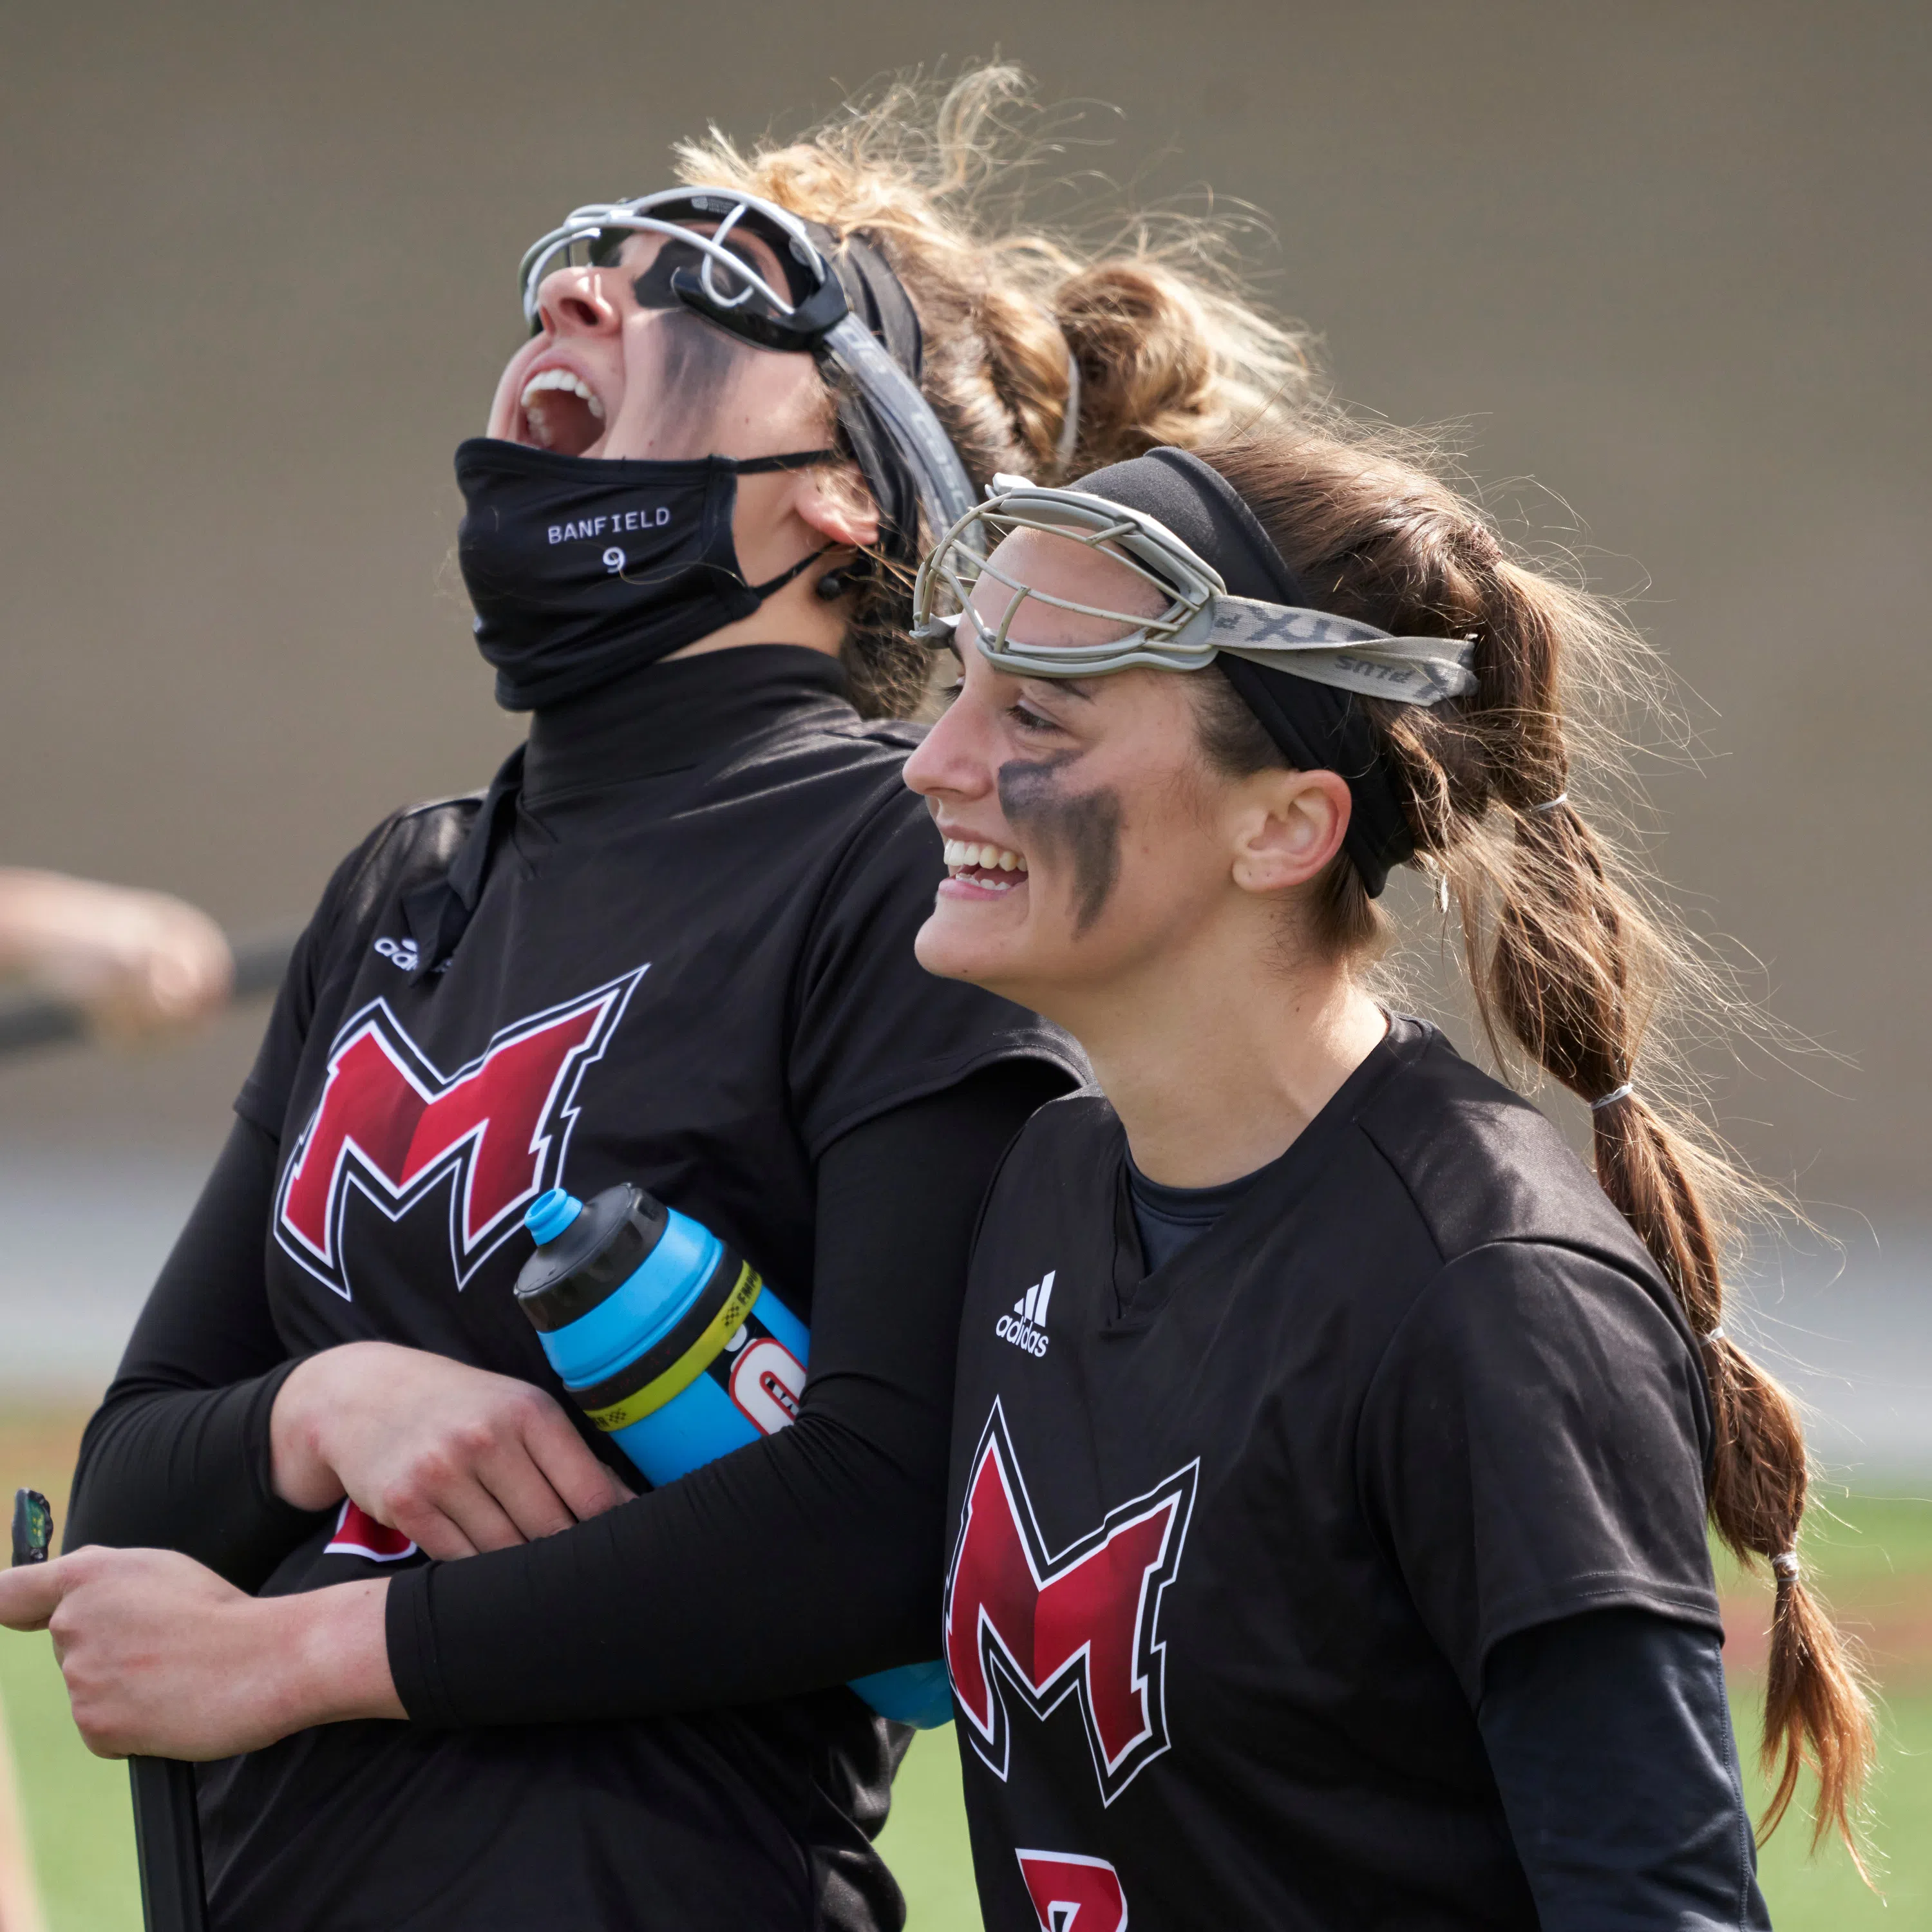 Teammates on the women's lacrosse team celebrate a goal on the sidelines.